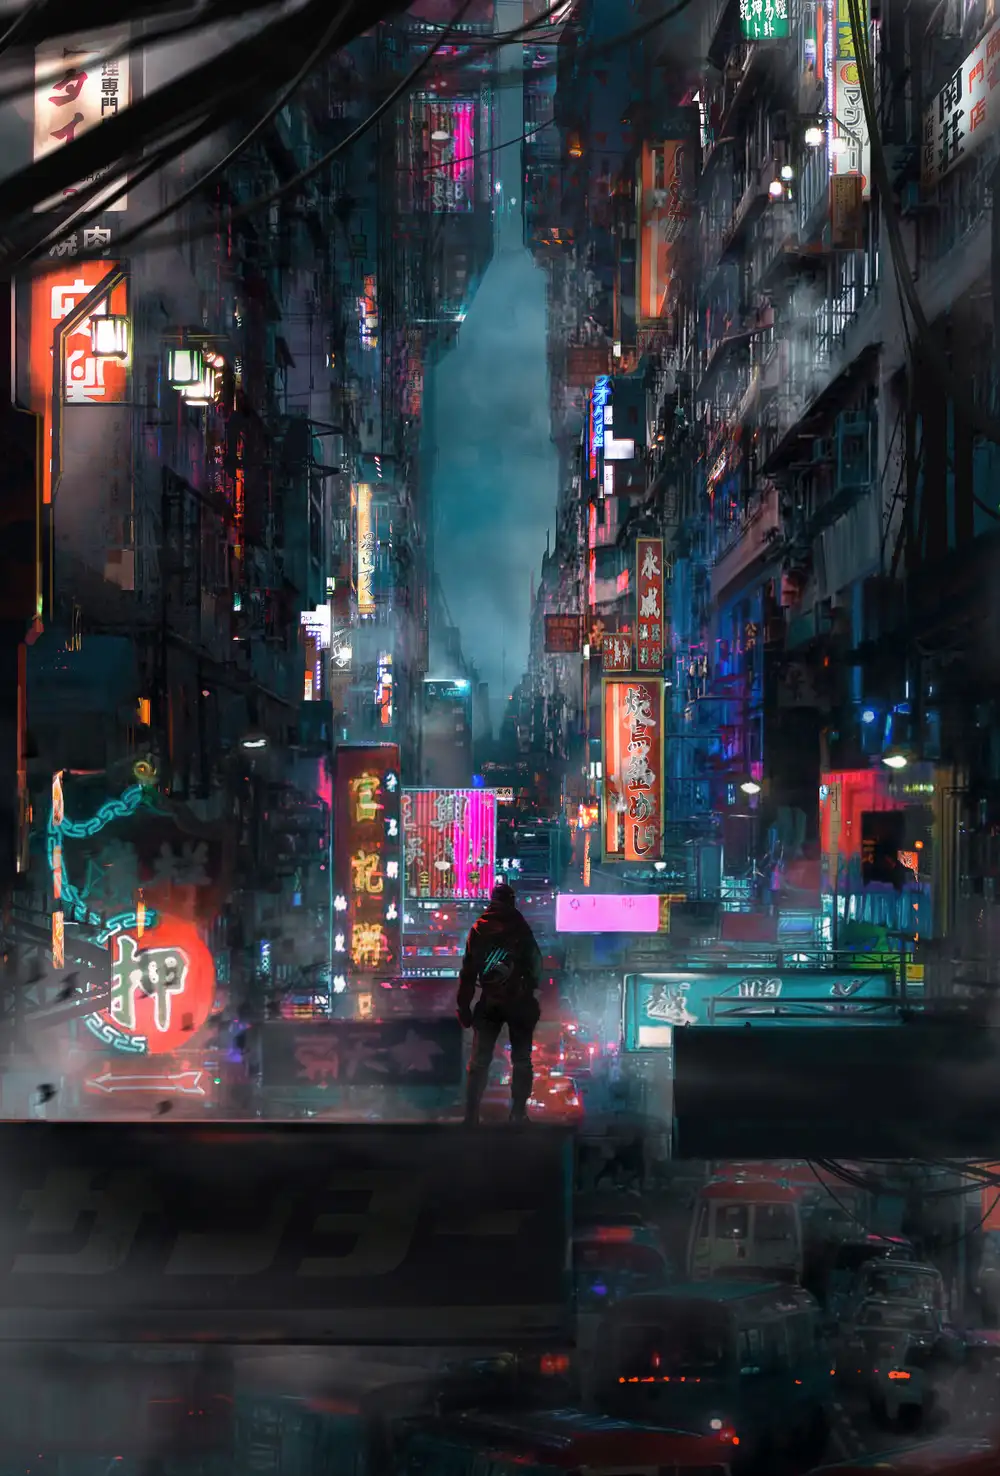 Cyberpunk 2077 wallpaper - image of a person standing on a rooftop looking down at neon-lit streets - Cyberpunk